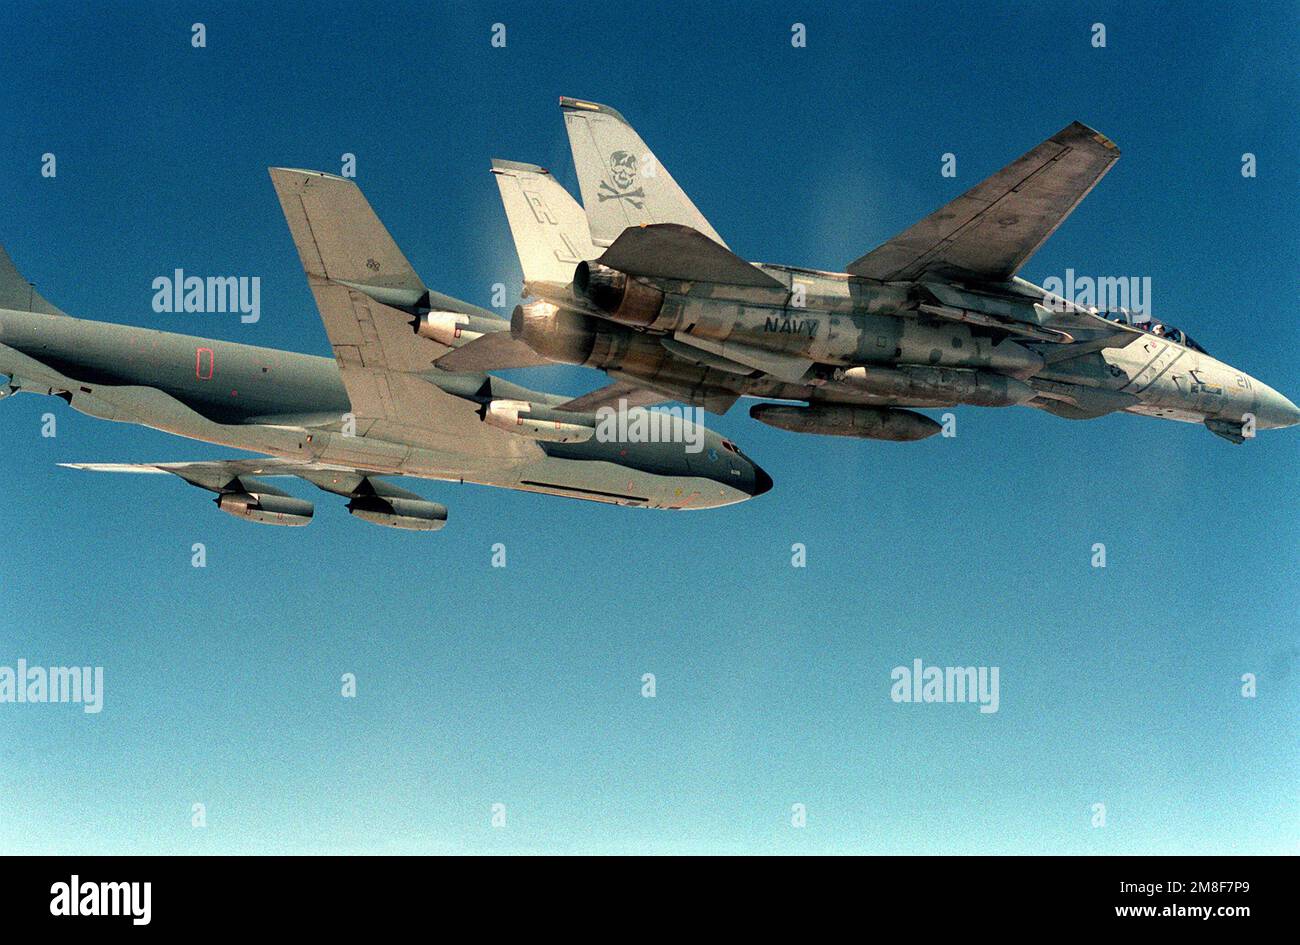 A Fighter Squadron 84 (VF-84) F-14A Tomcat aircraft flies beside